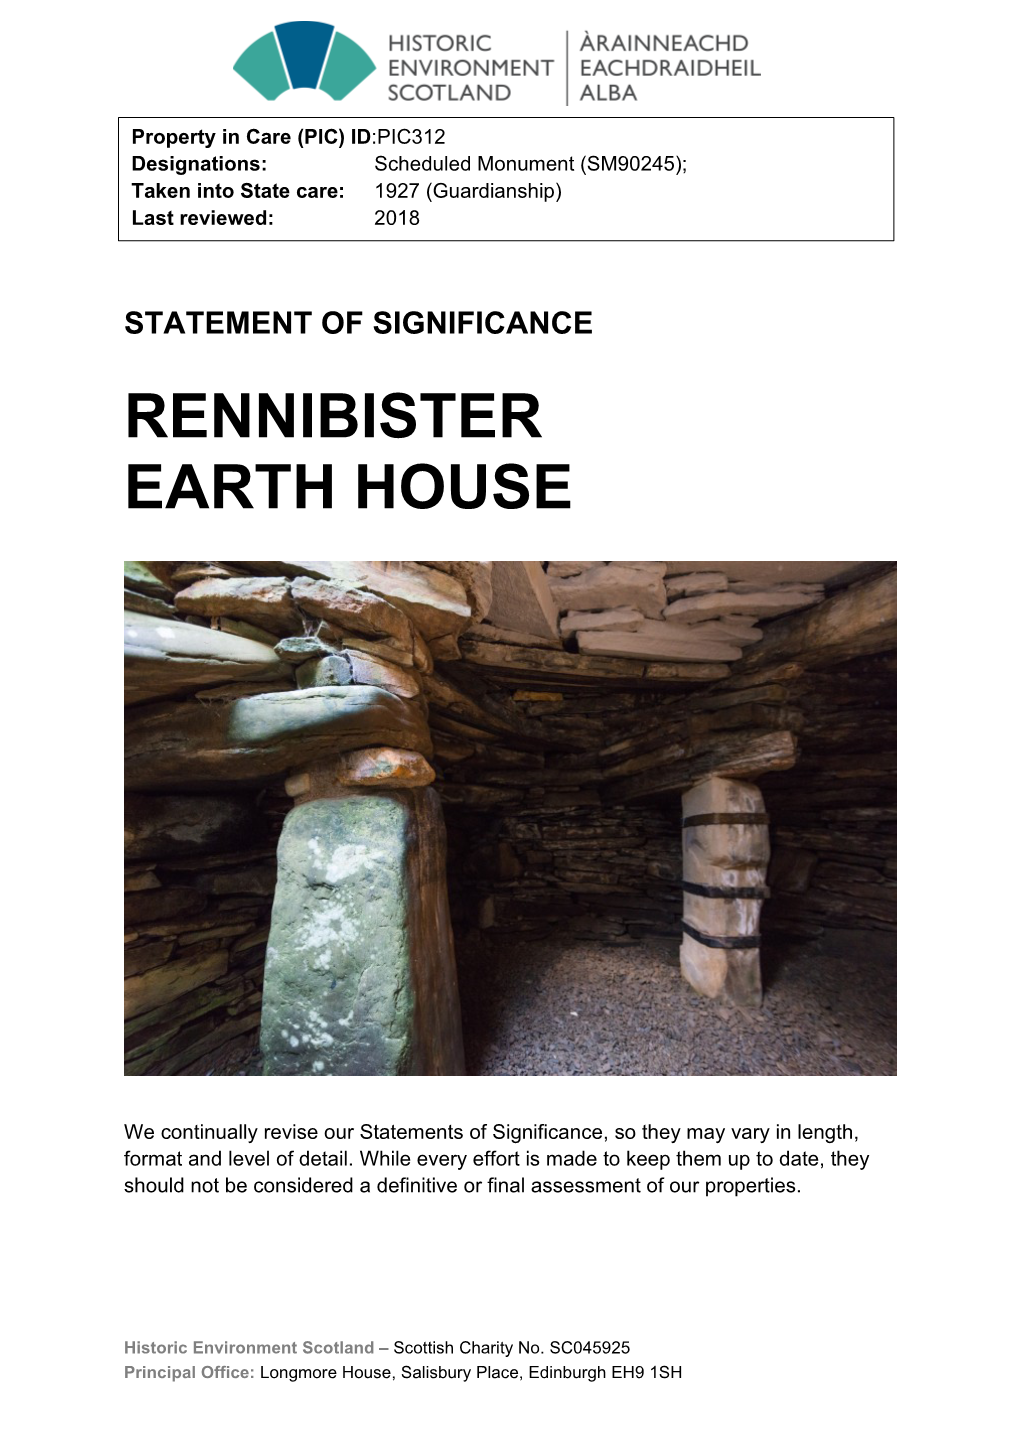 Rennibister Earth House